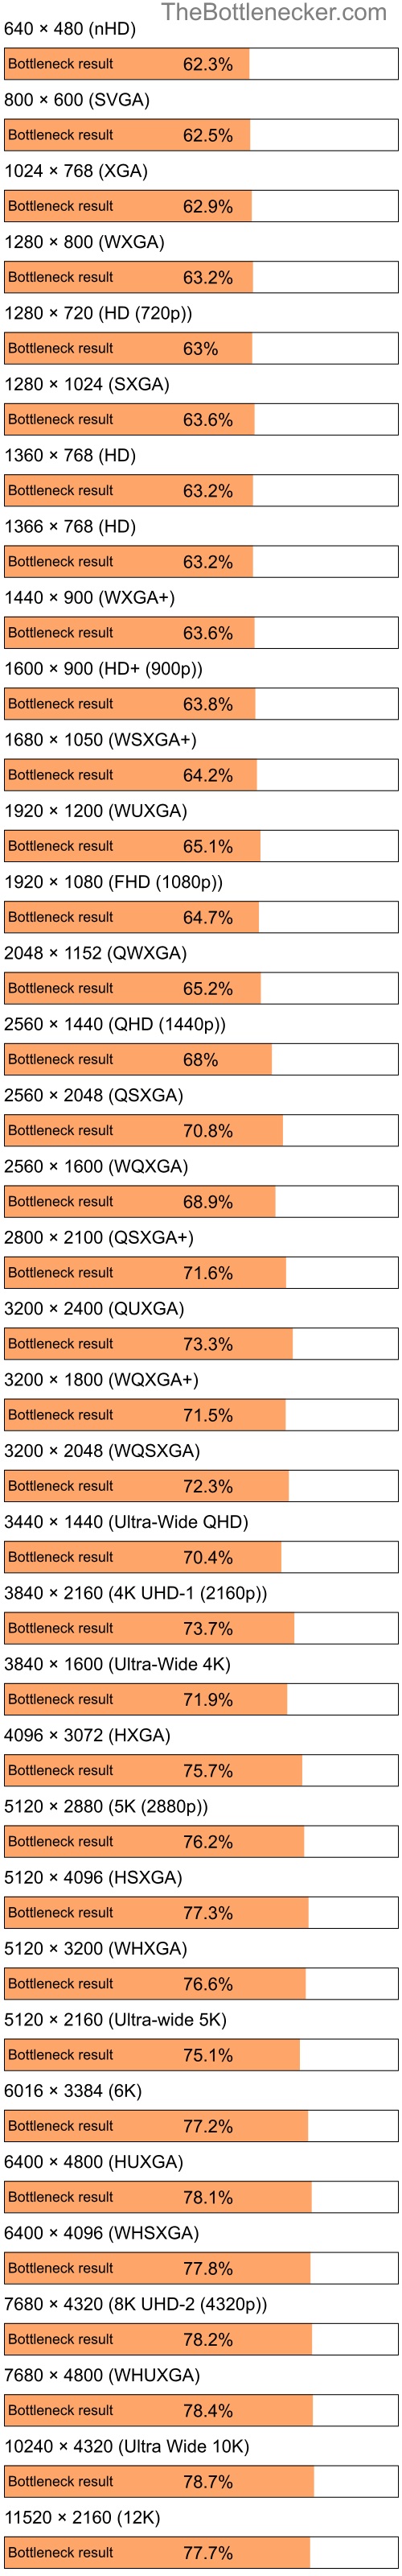 Bottleneck results by resolution for Intel Pentium 4 and NVIDIA GeForce 6700 XL in General Tasks